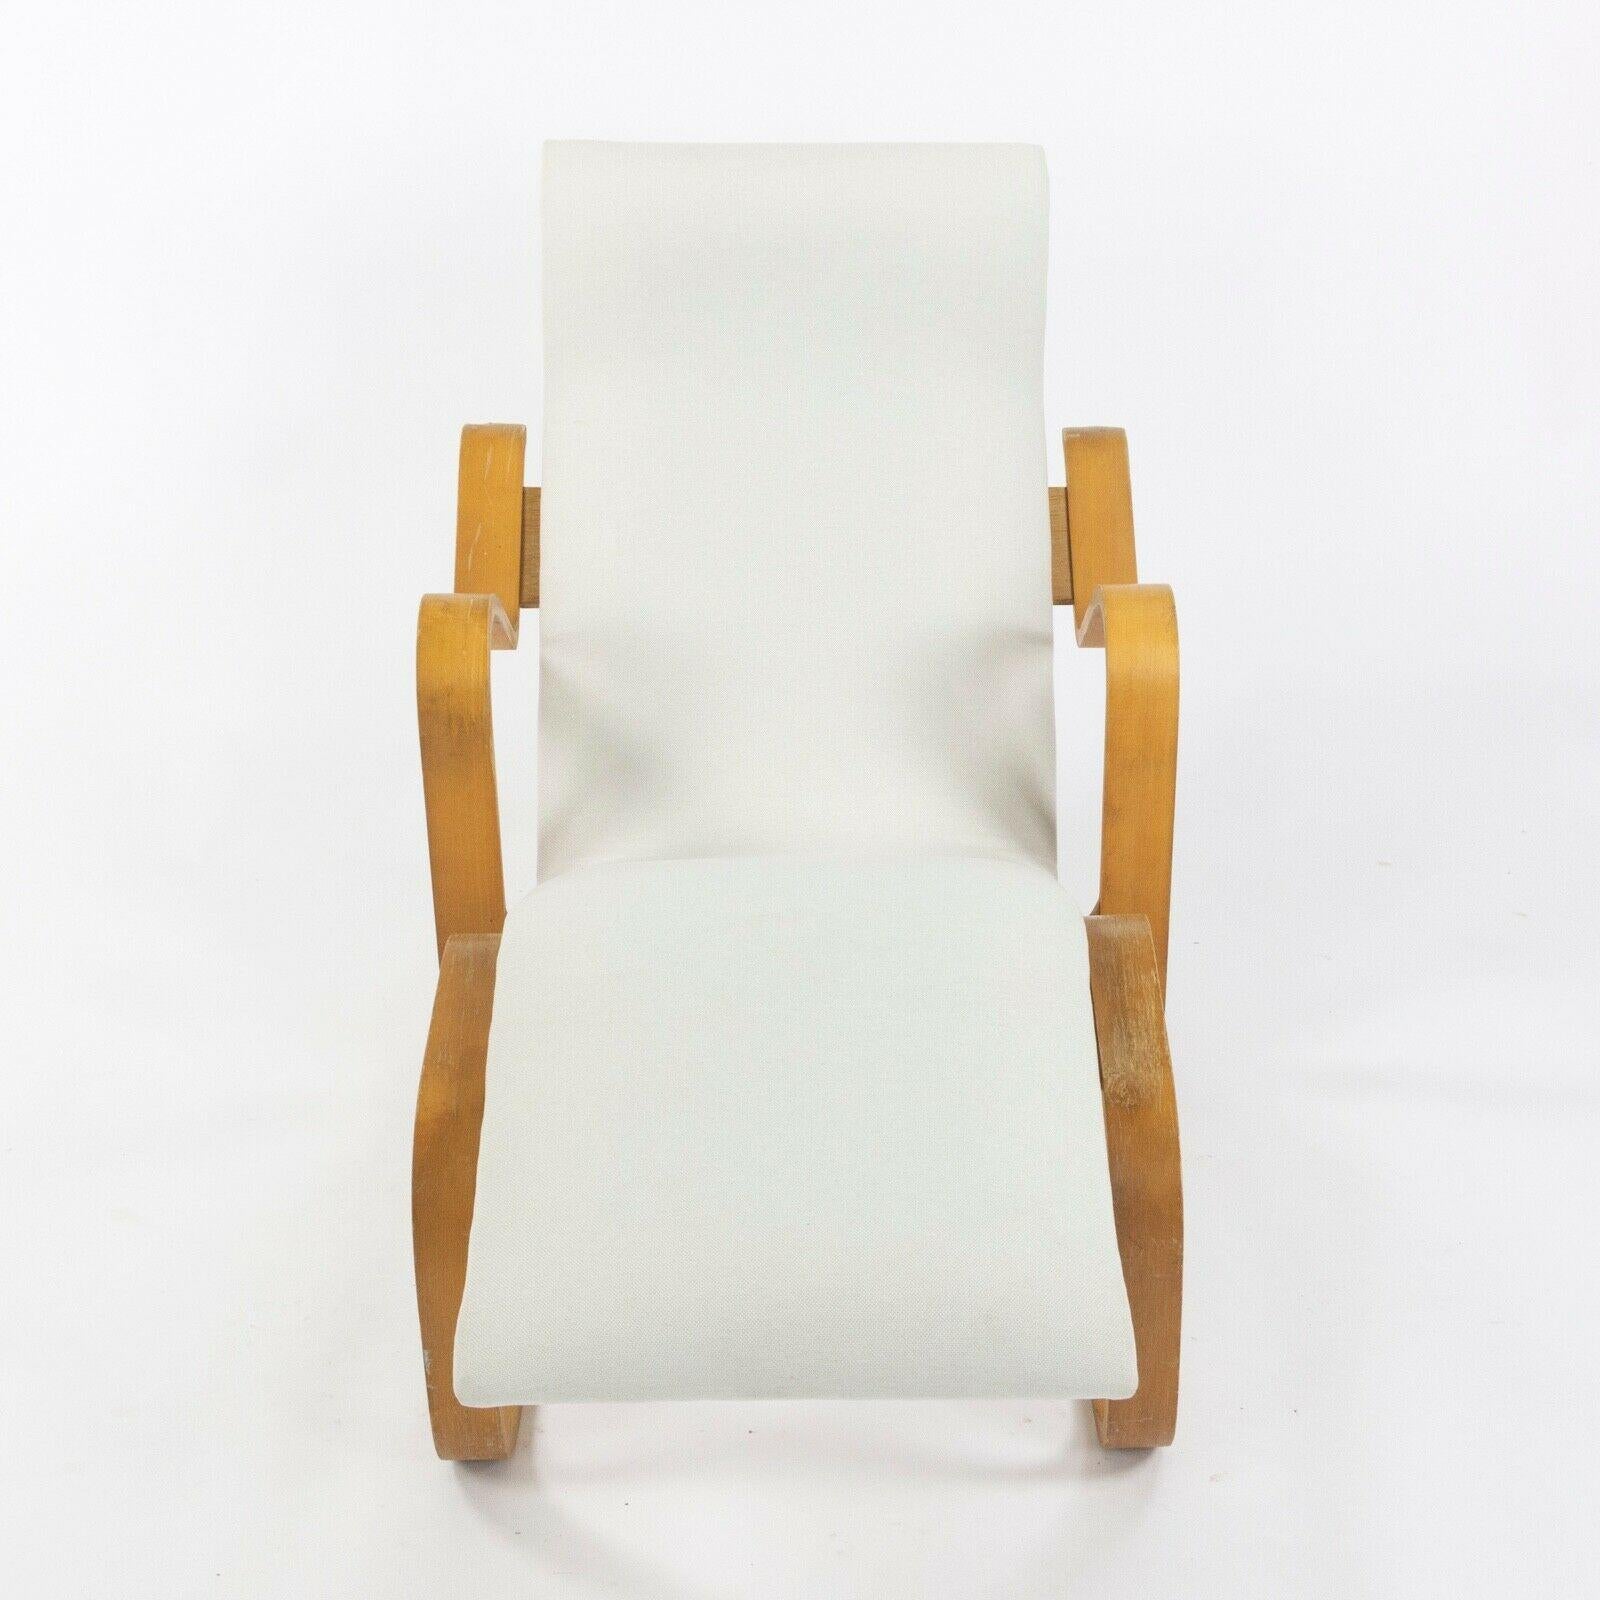 American 1960s Marcel Breuer for Knoll Isokon Chaise Lounge Chair New White Upholstery For Sale